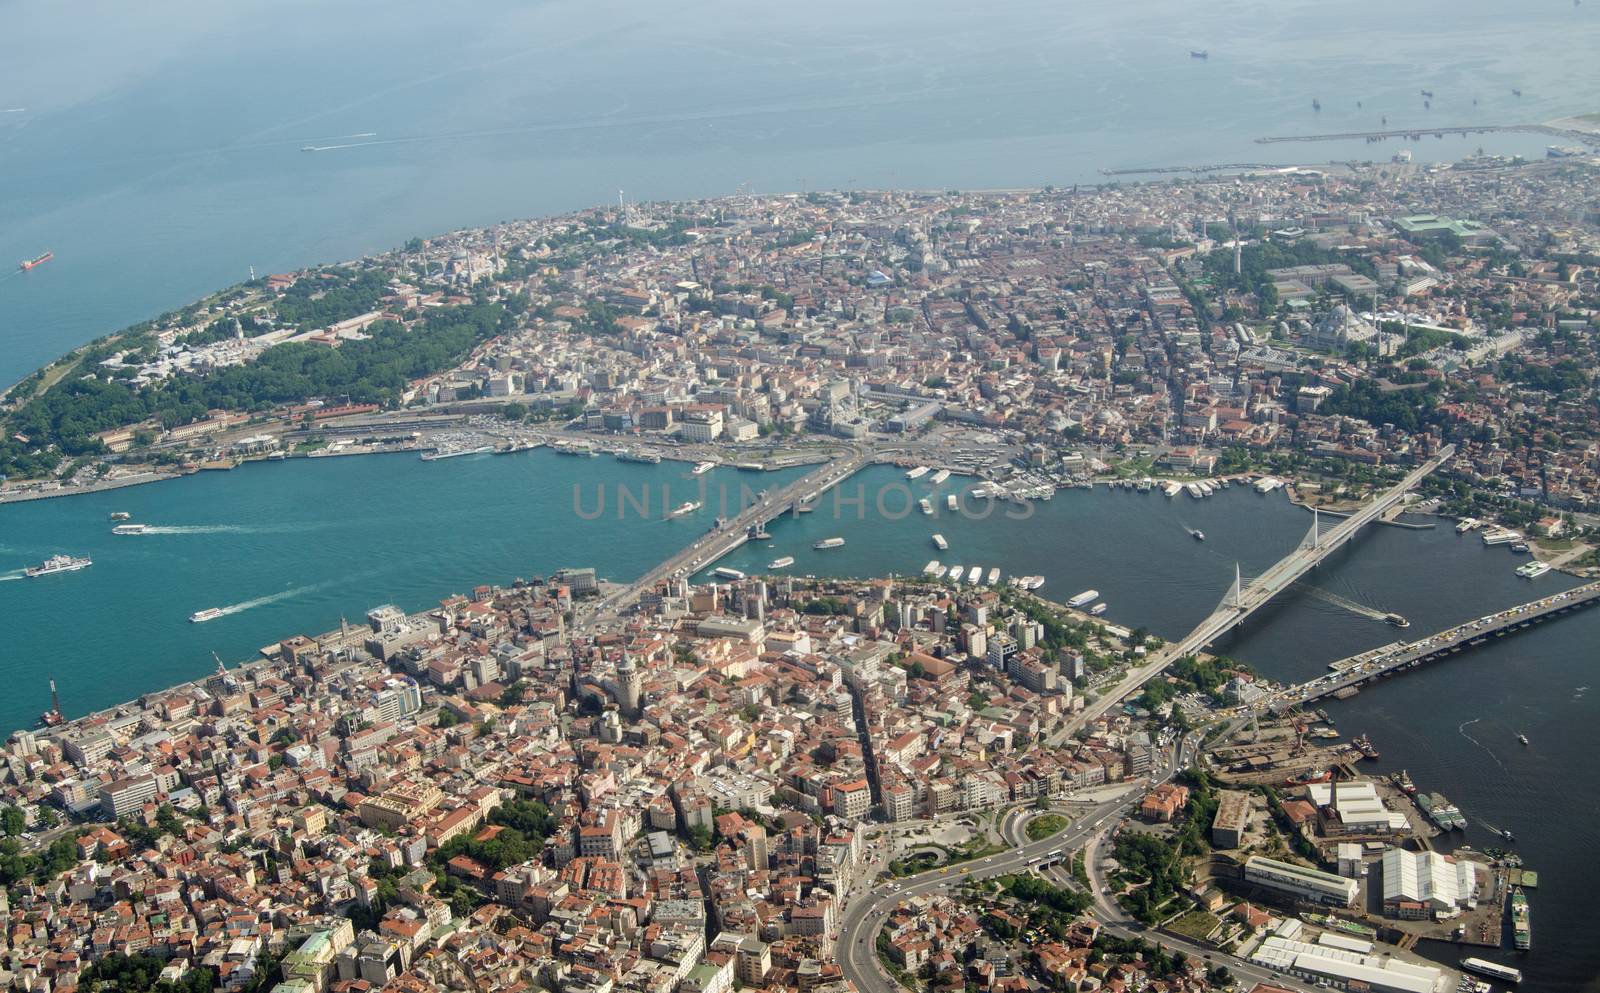 Aerial view looking south across Istanbul across the Golden Horn waterway towards the old city and the Marmara Sea beyond.  Crossing the Golden Horn are the Galata, Ataturk and Halic bridges.